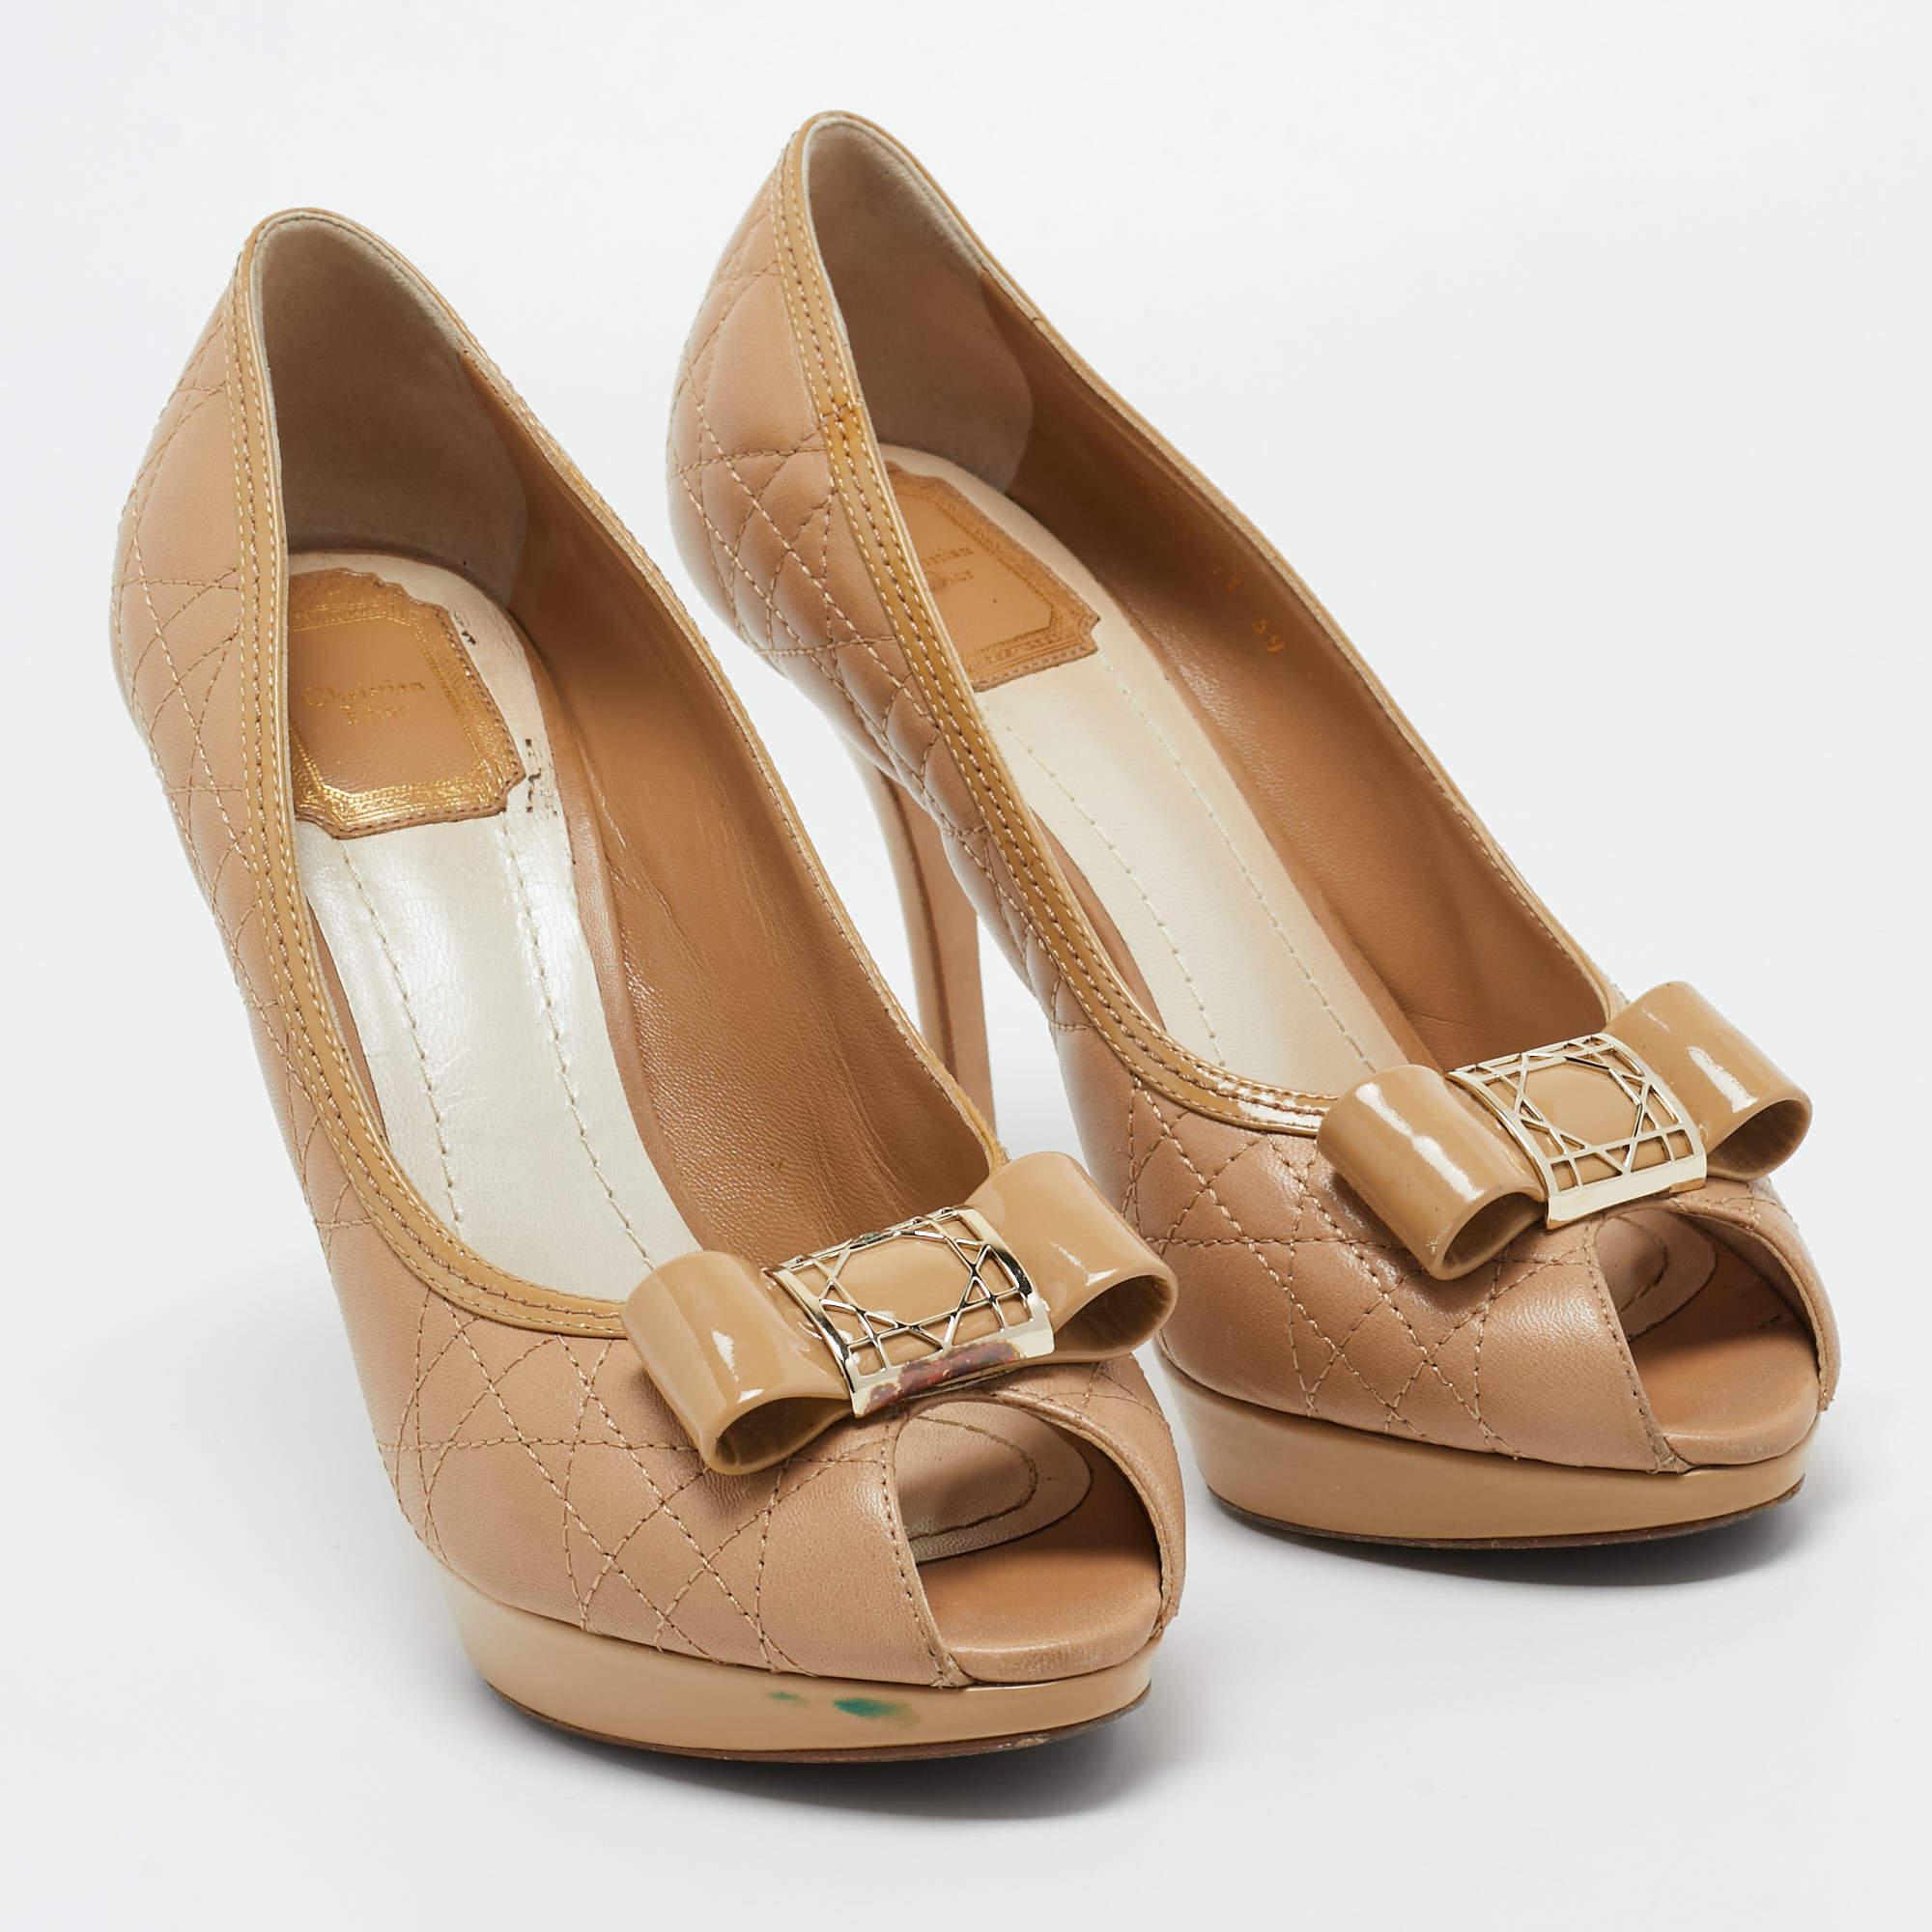 Dior Beige Patent Leather and Leather Peep Toe Pumps Size 39 3